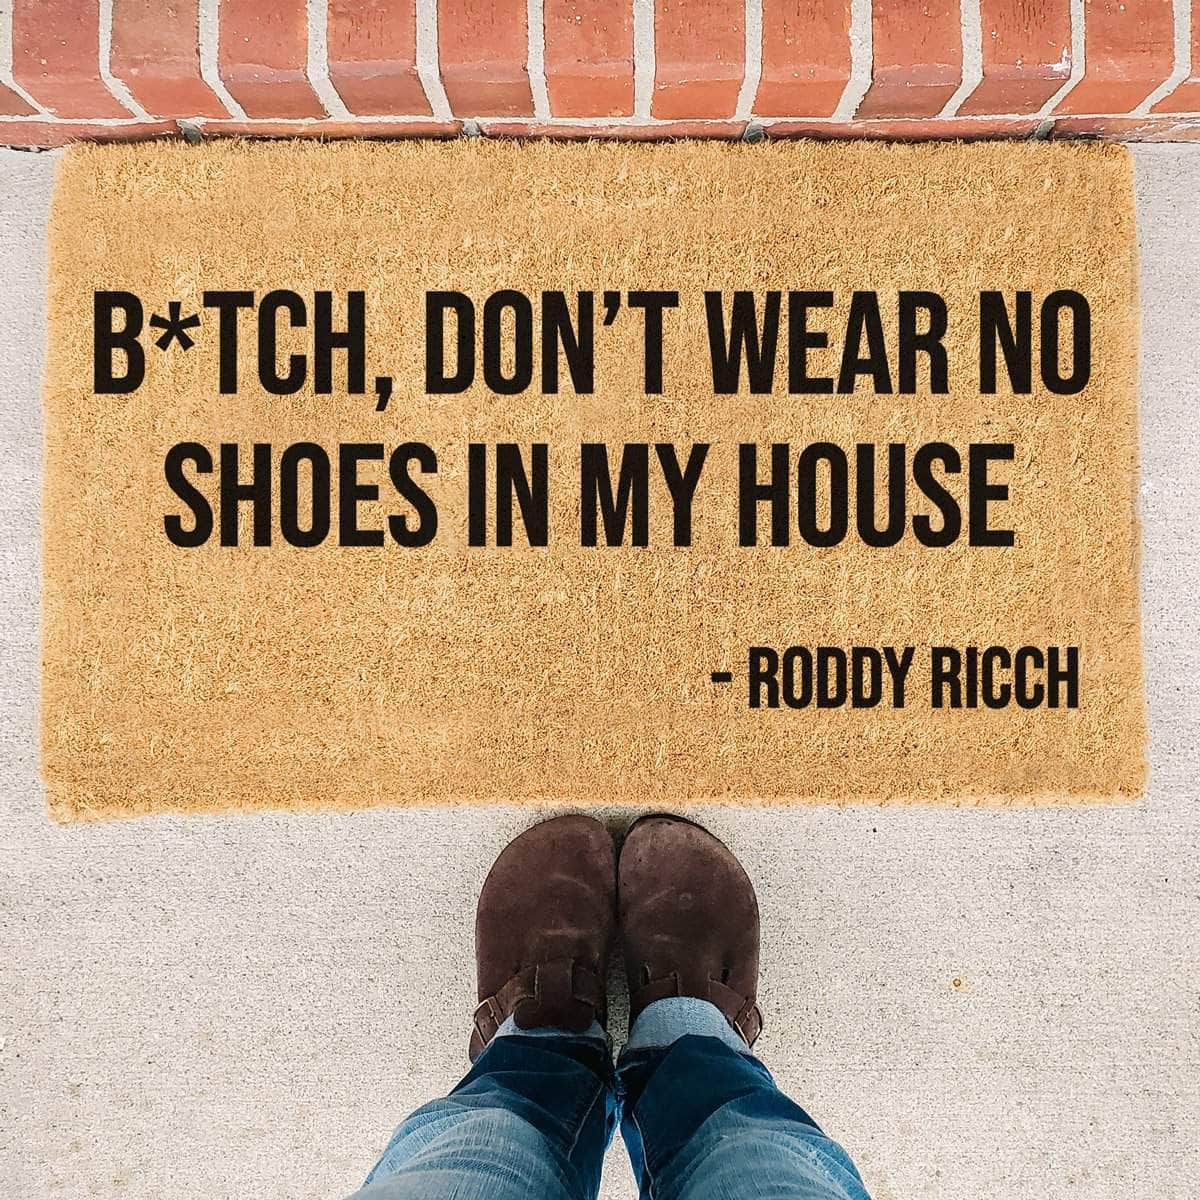 Btch No Shoes in My House Funny Doormat No Shoes Funny Welcome Mat